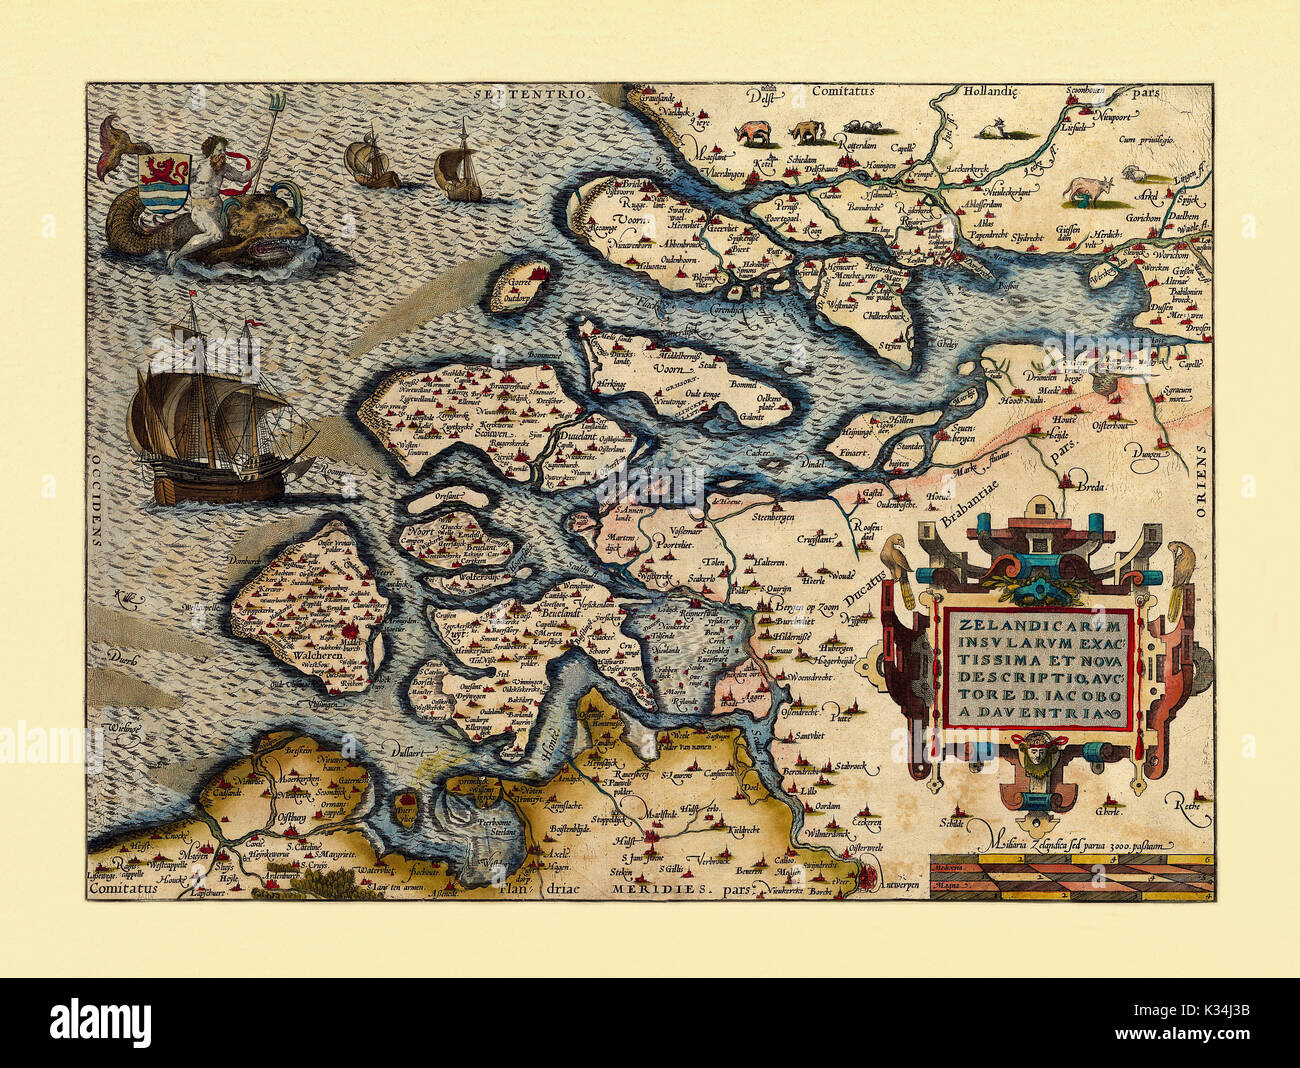 Old map of Netherlands. Excellent state of preservation realized in ancient style. All the graphic composition is inside a frame. By Ortelius, Theatrum Orbis Terrarum, Antwerp, 1570 Stock Photo